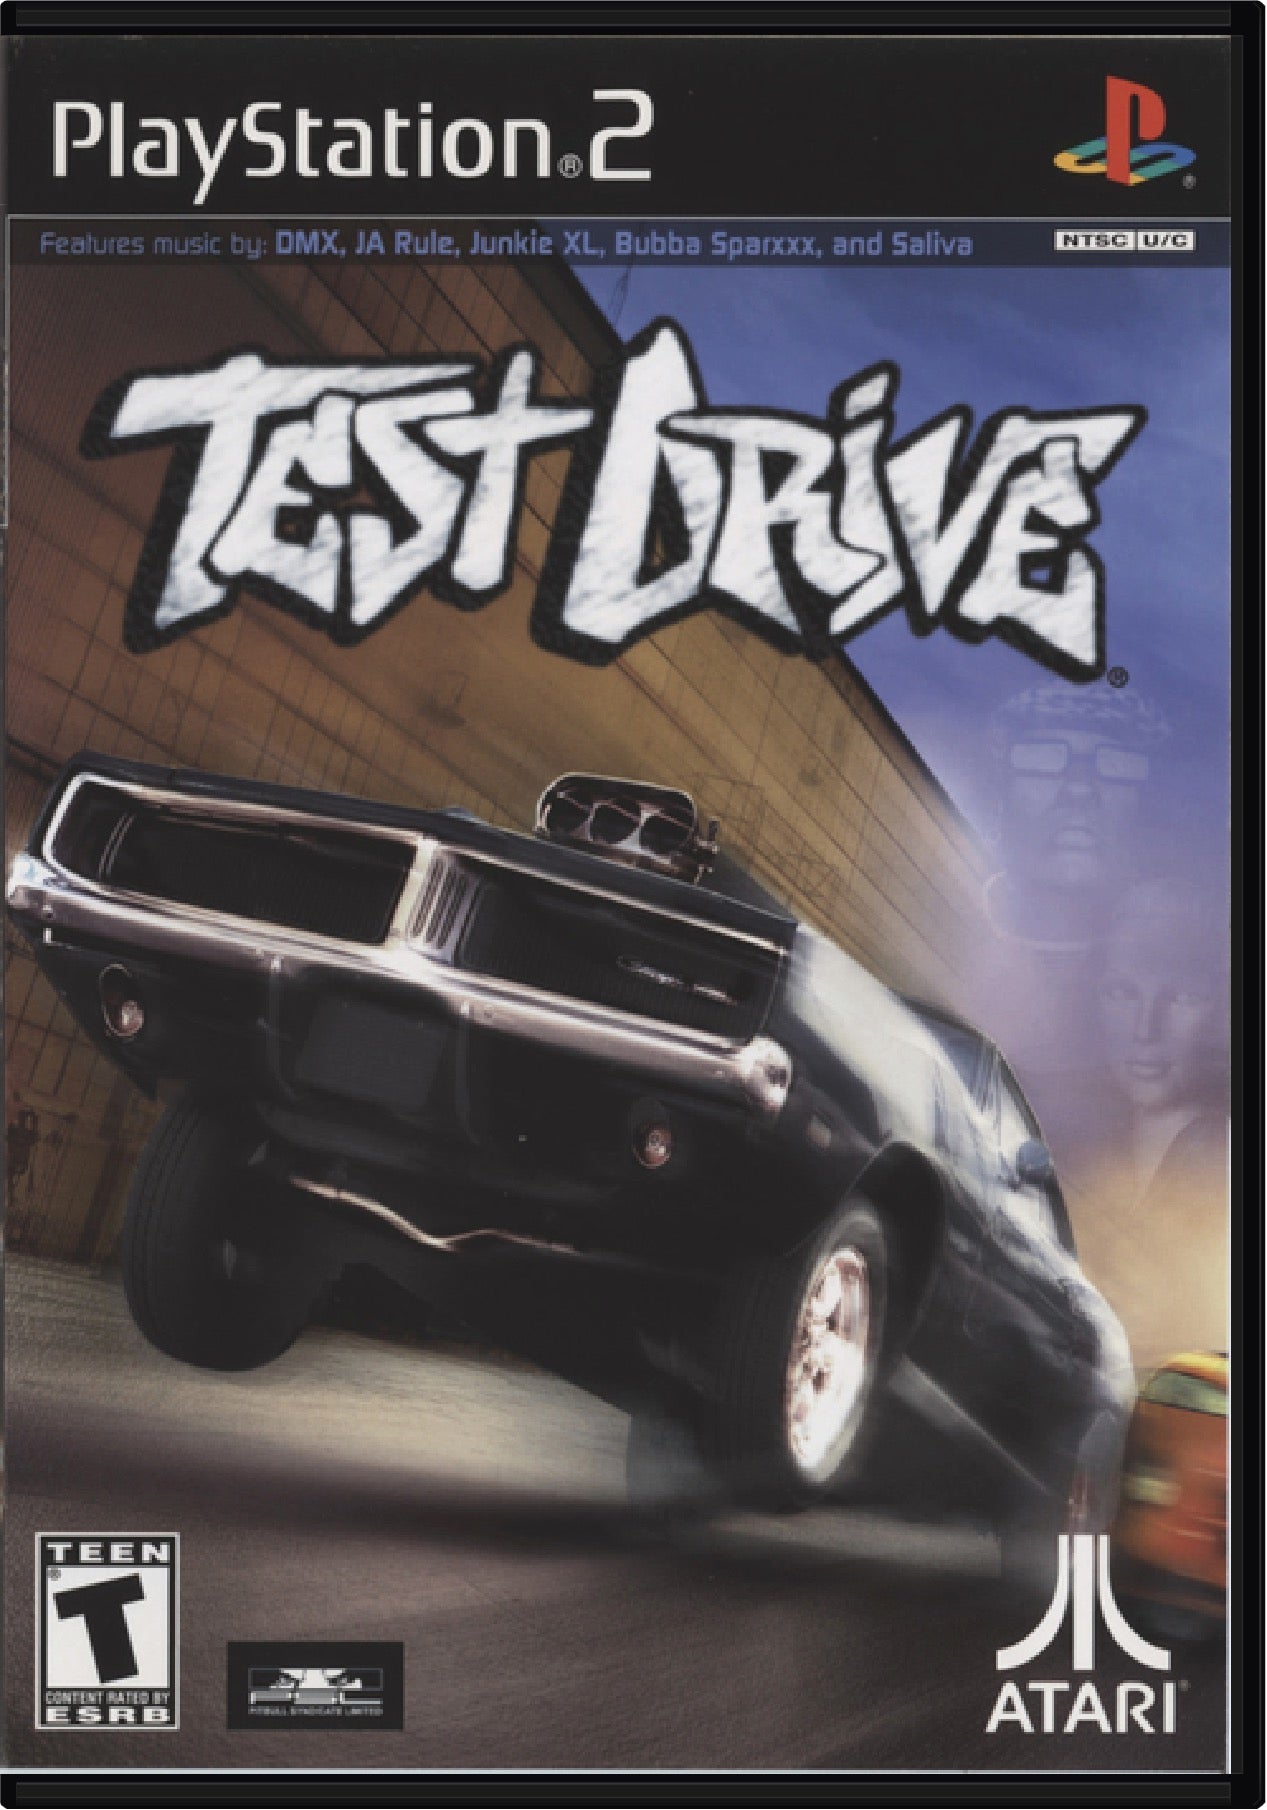 Test Drive Cover Art and Product Photo